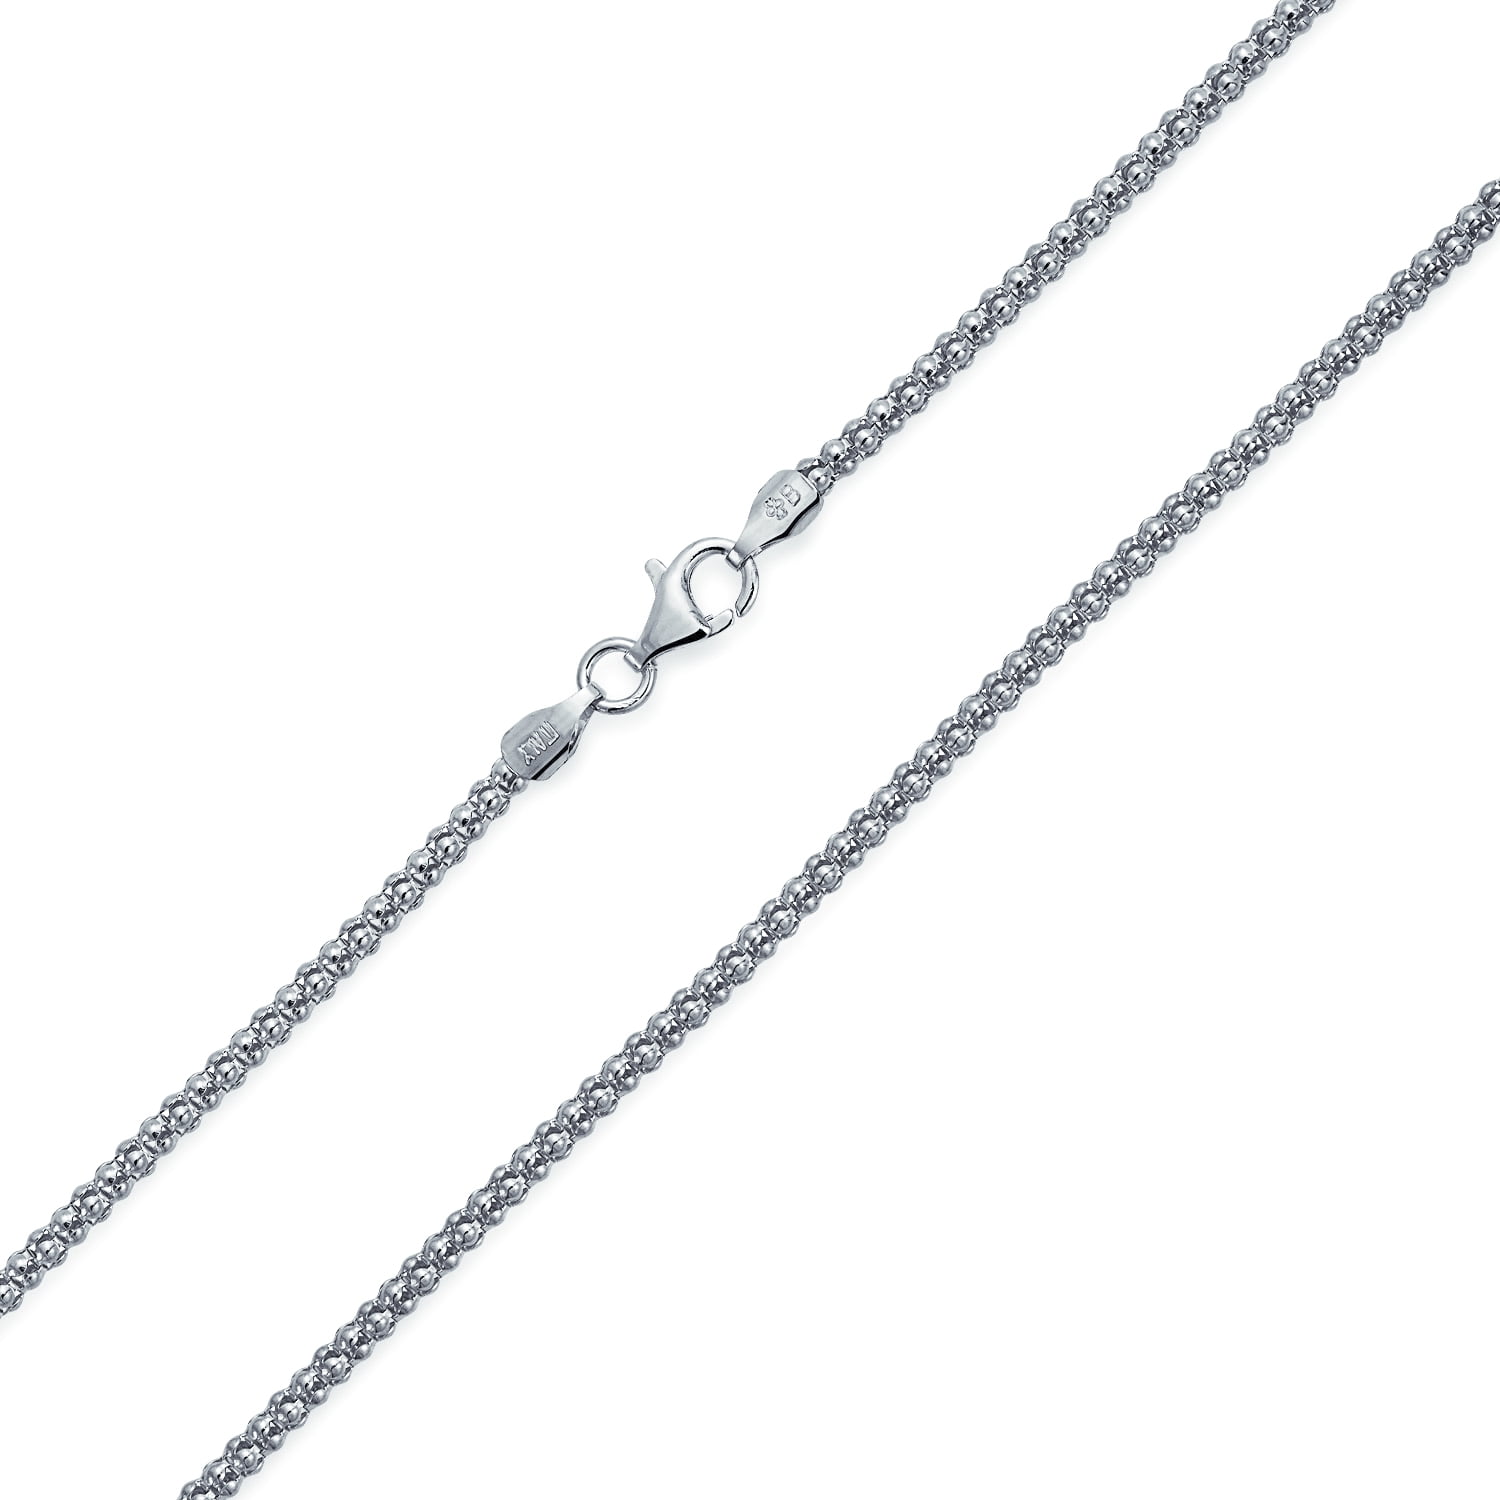 Save buying! Wholesale Bali 3 mm Oxidized Popcorn Sterling Silver Chains 